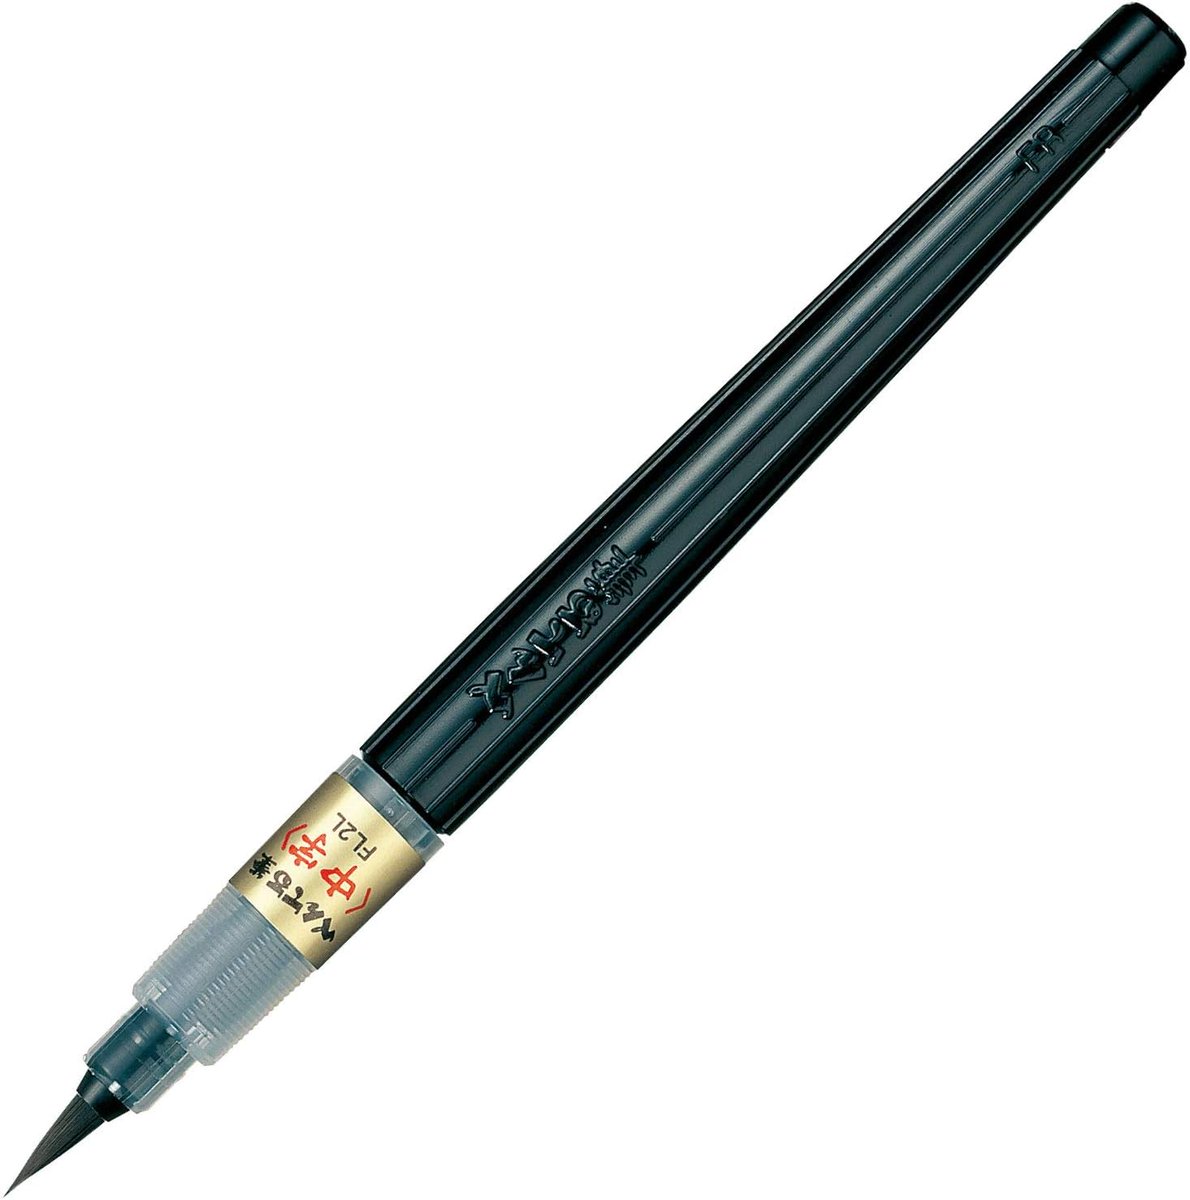 Does anyone have a recommendation for a brush pen that is as good as a pentel fude brush pen, but is refillable?